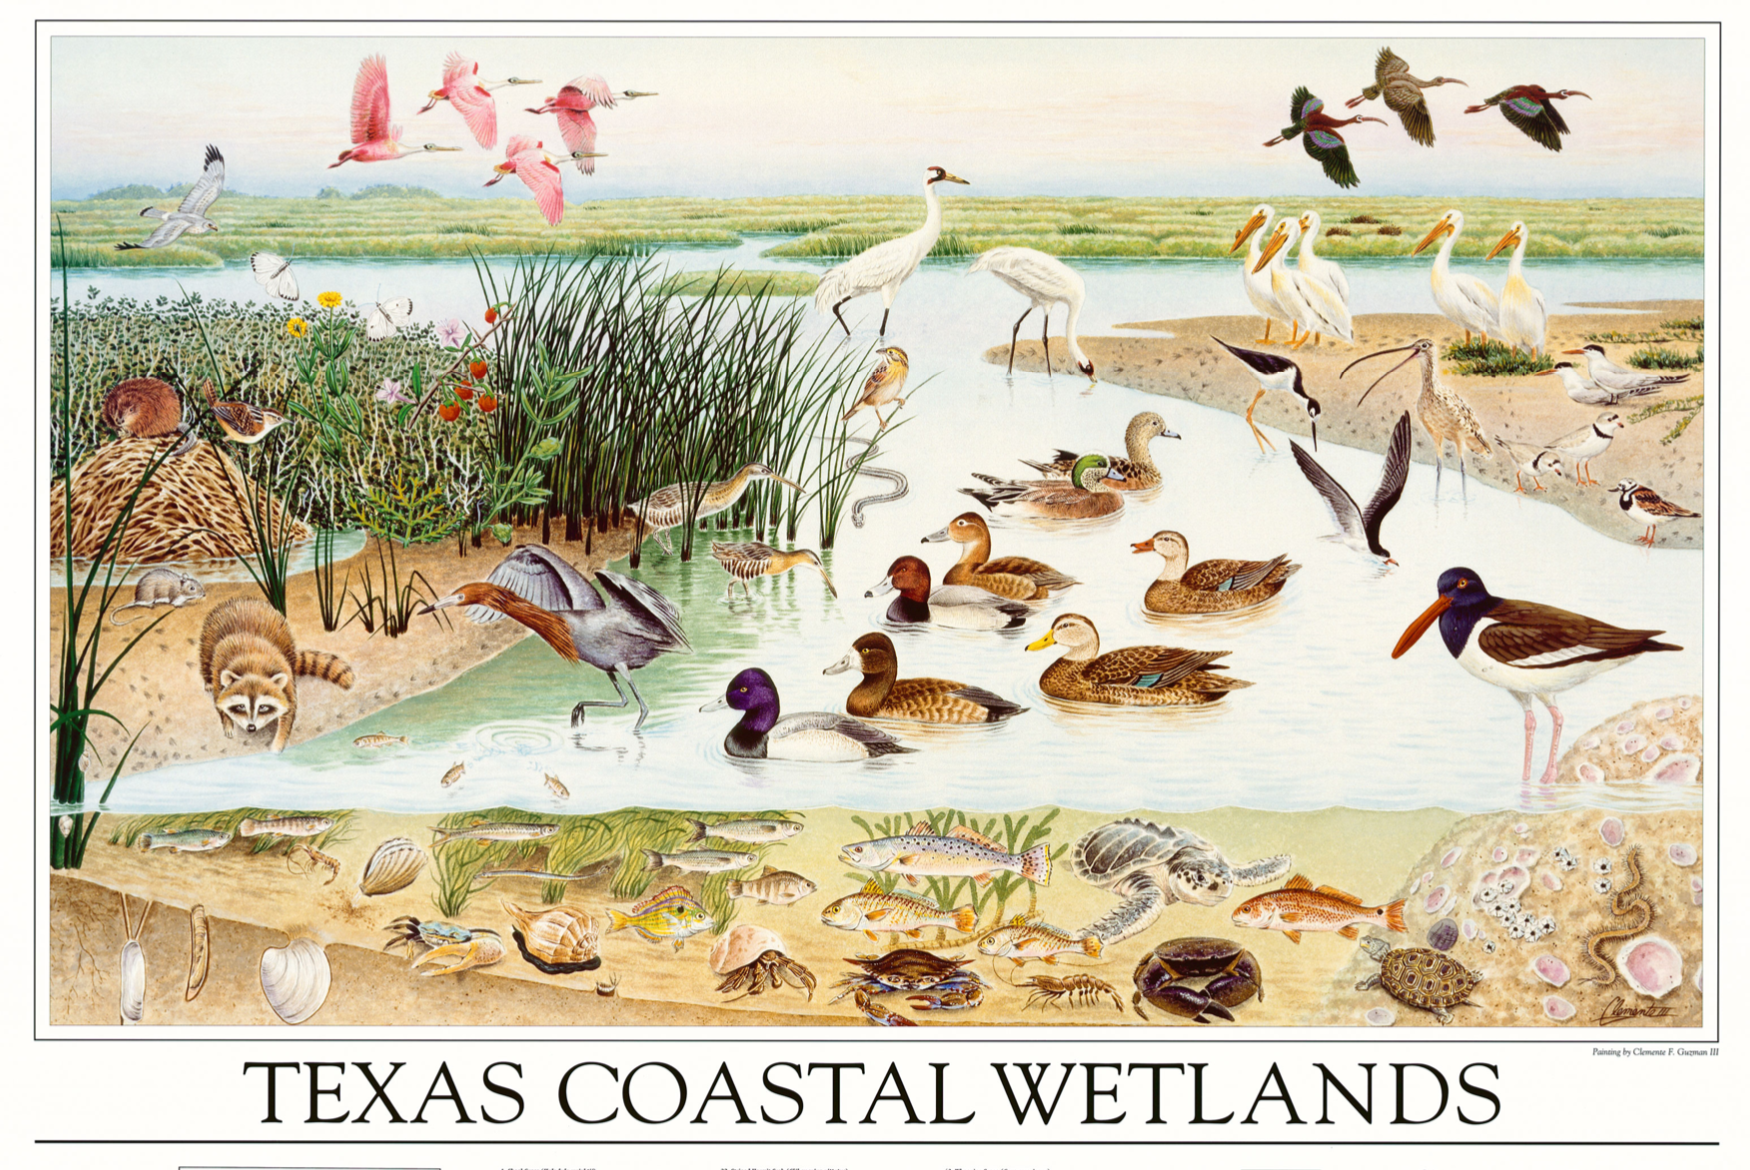 TPWD Coastal Wetlands Poster and Fact Sheets